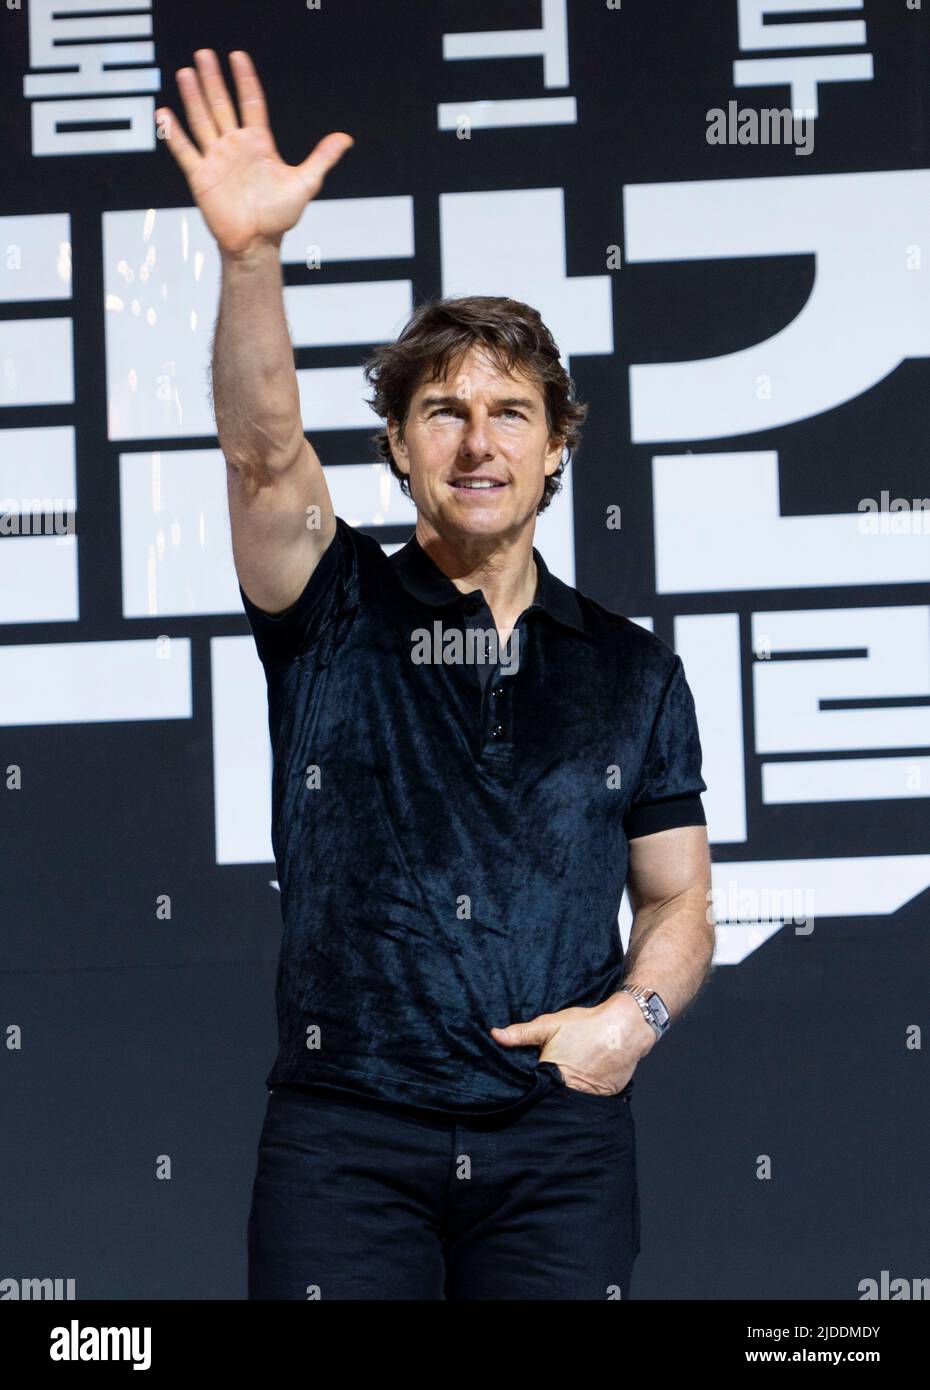 Tom Cruise Arrives Back in London While 'Top Gun 2' Is Possibly Returning  to #1 at the Box Office!: Photo 4781293, Christopher McQuarrie, Tom Cruise  Photos